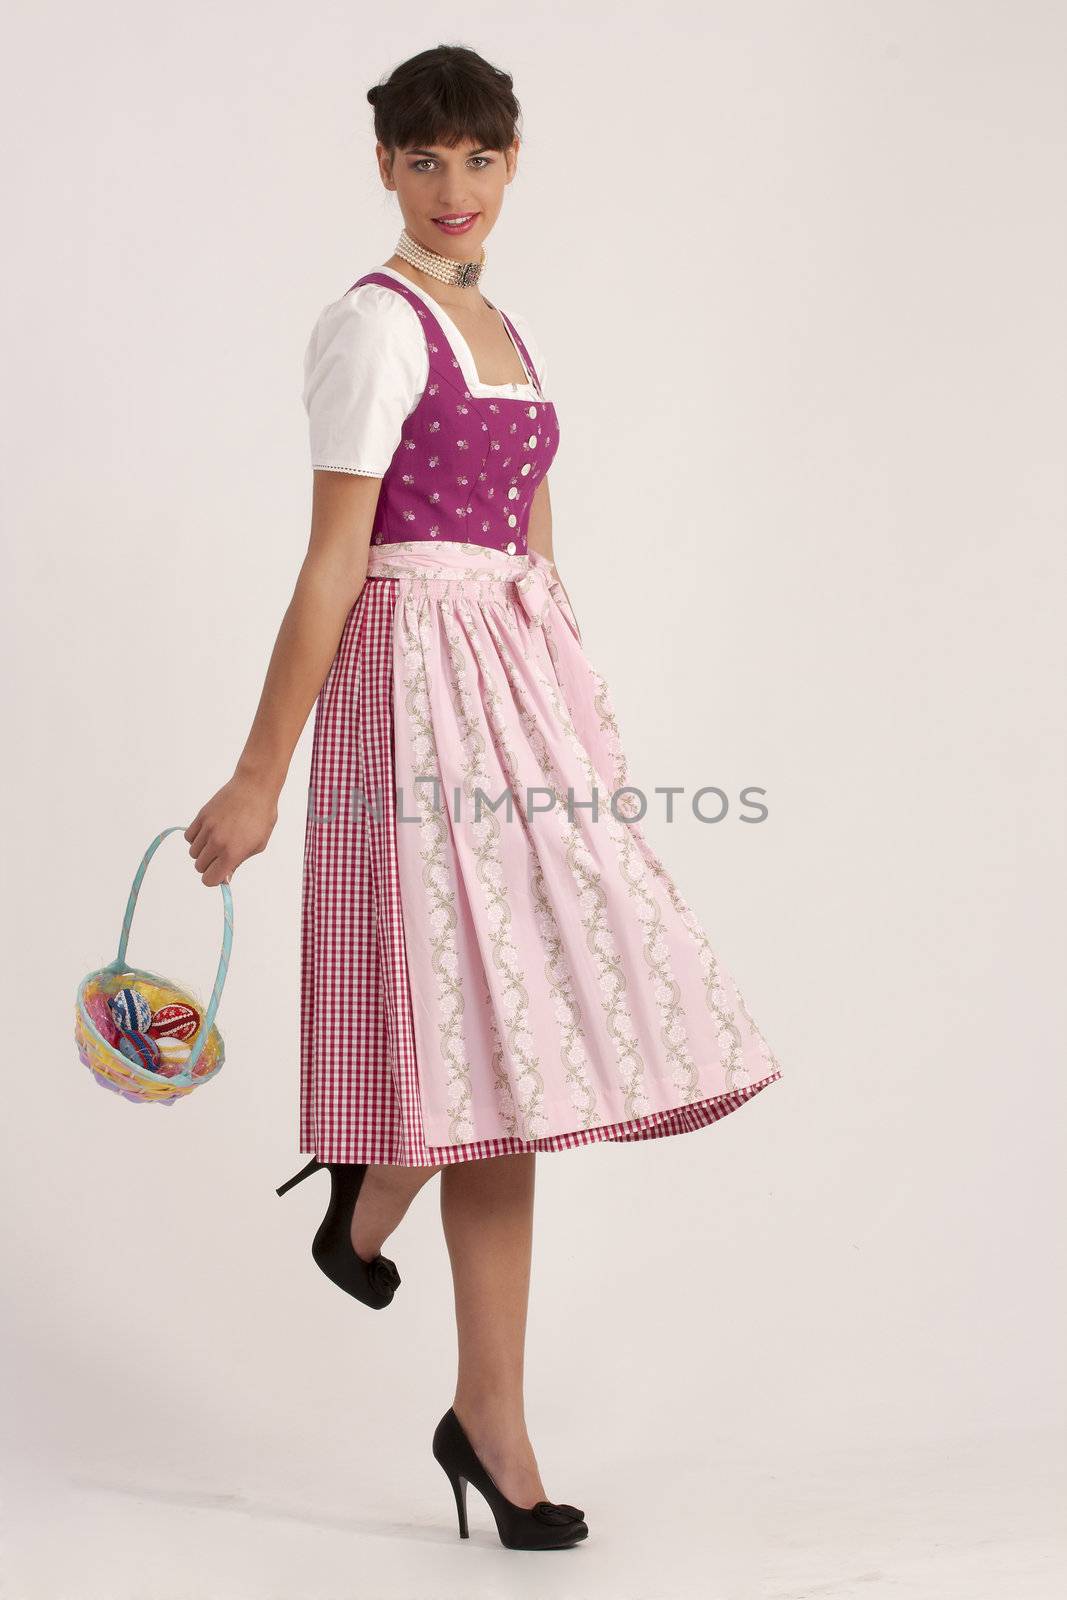 Young woman in Bavarian dress with an Easter basket